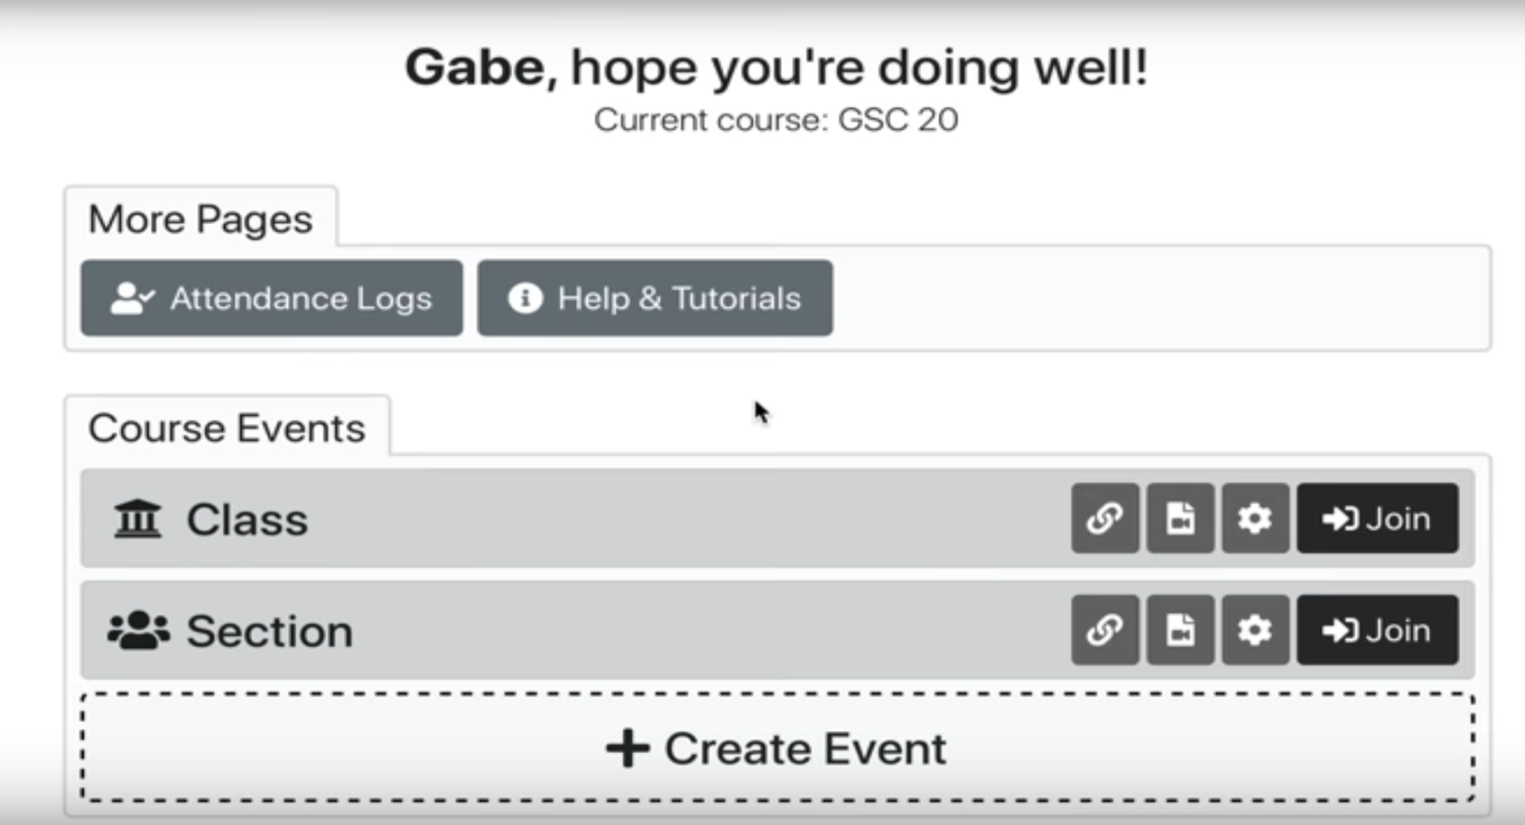 Gather page showing Join button for Class and Section